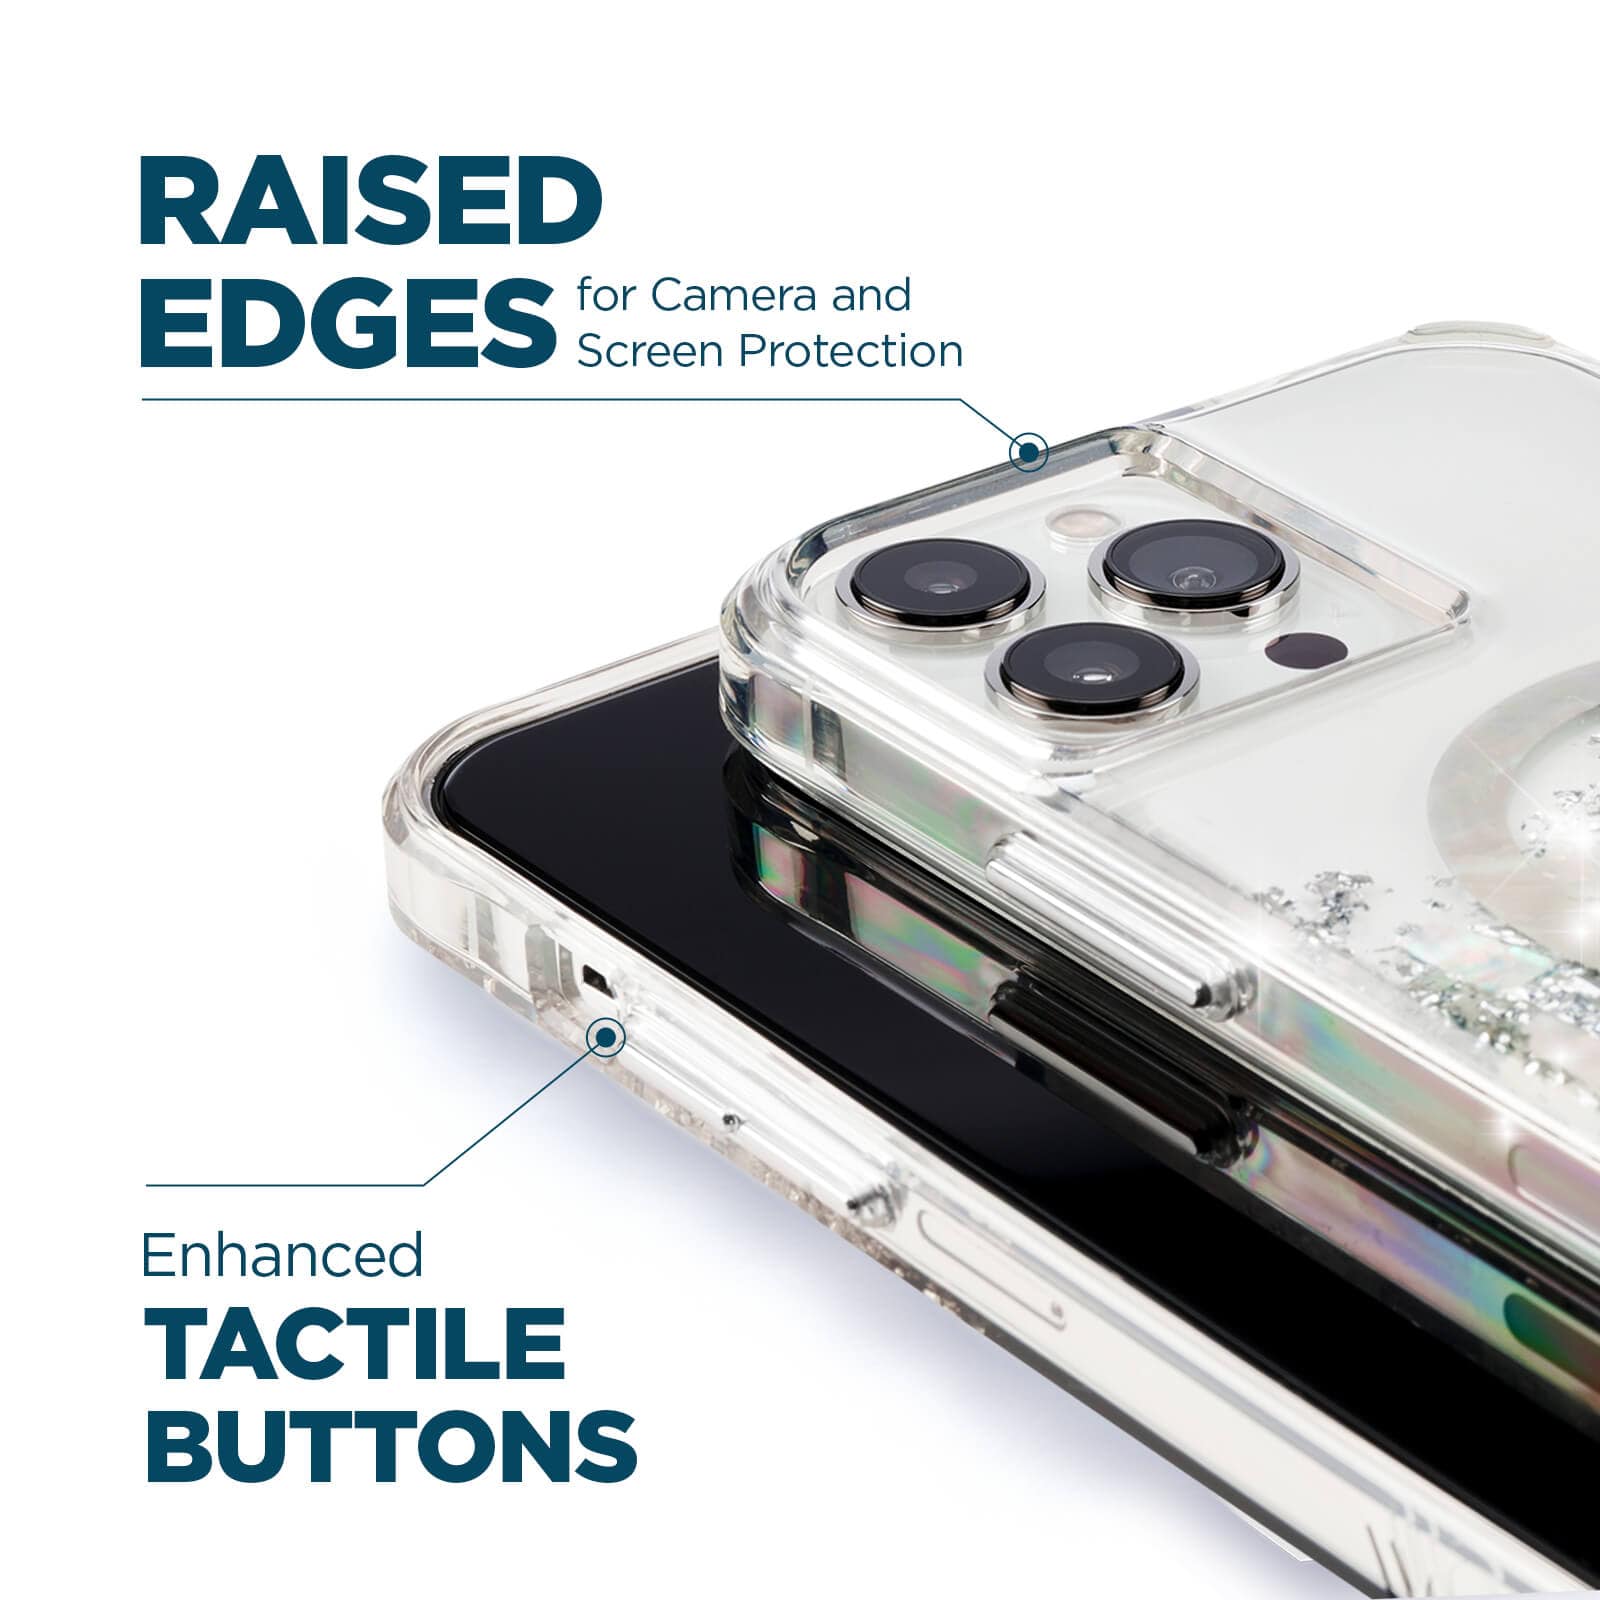 Raised edges for camera and screen protection. Enhanced tactile buttons. color::Pearl